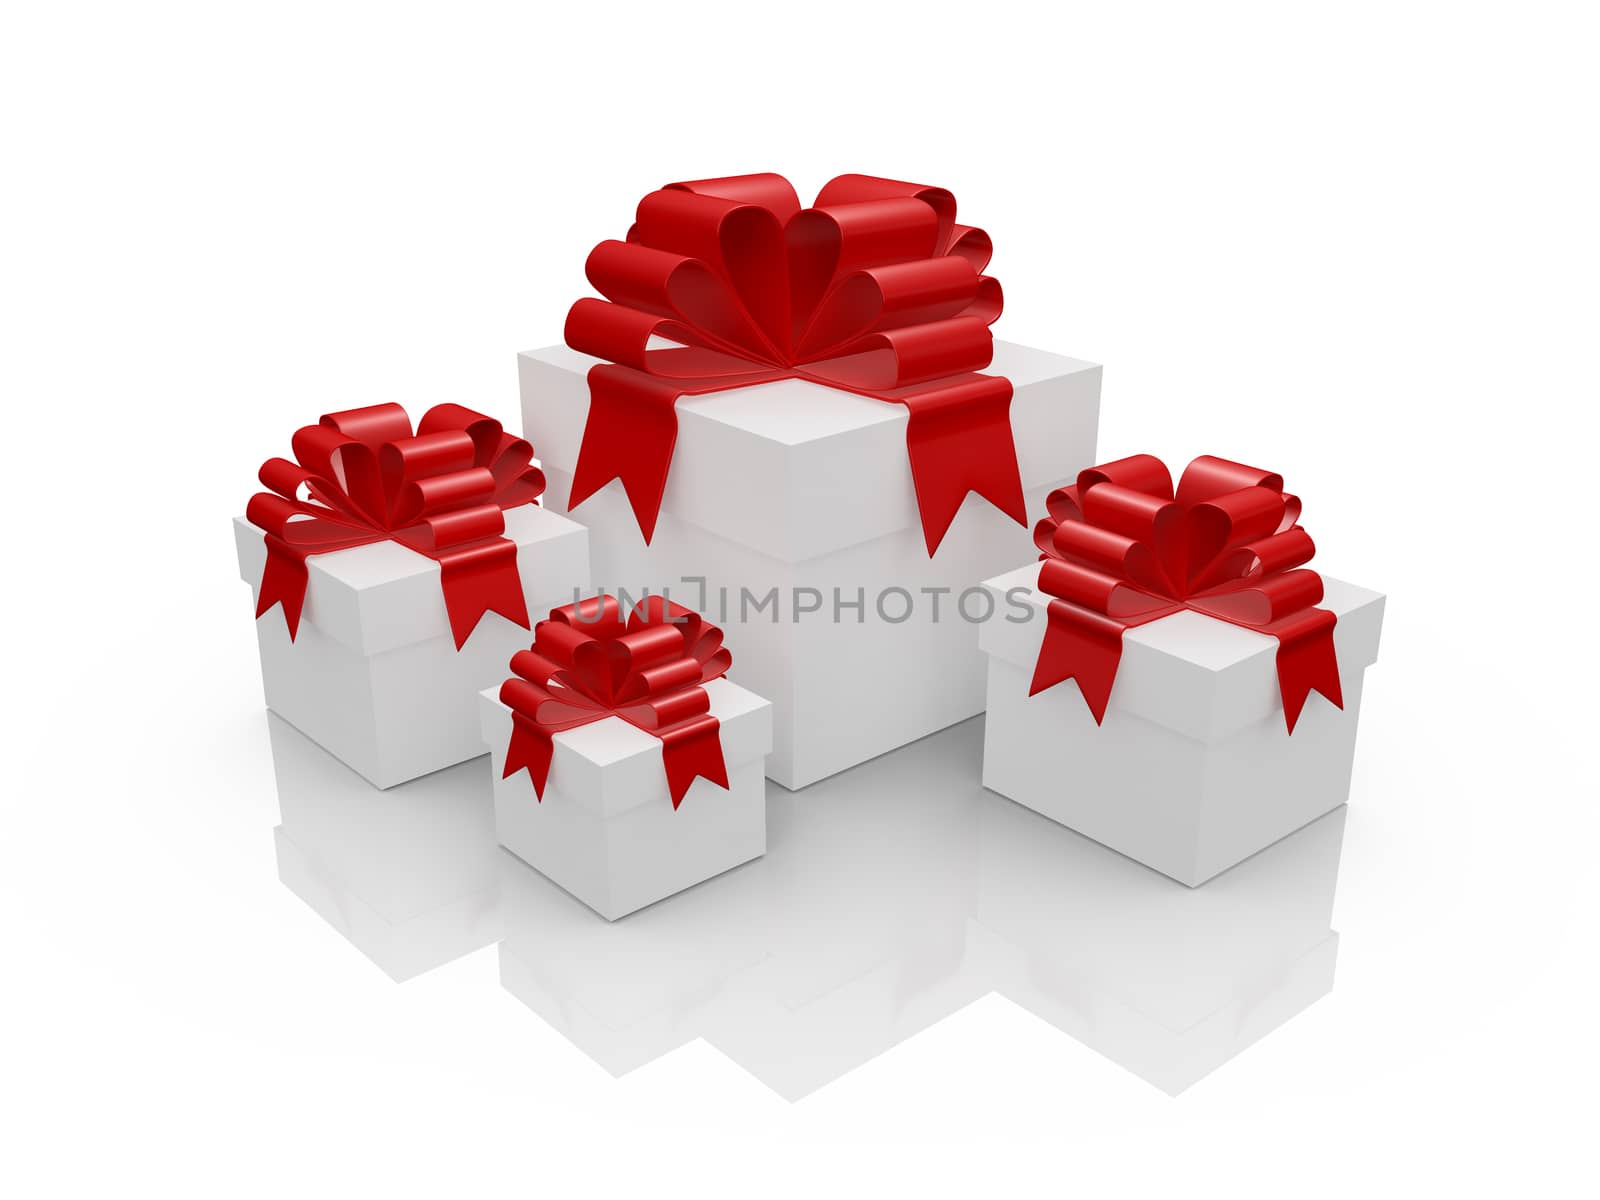 Four white gift boxes with red ribbon for surprise, isolated on white background.